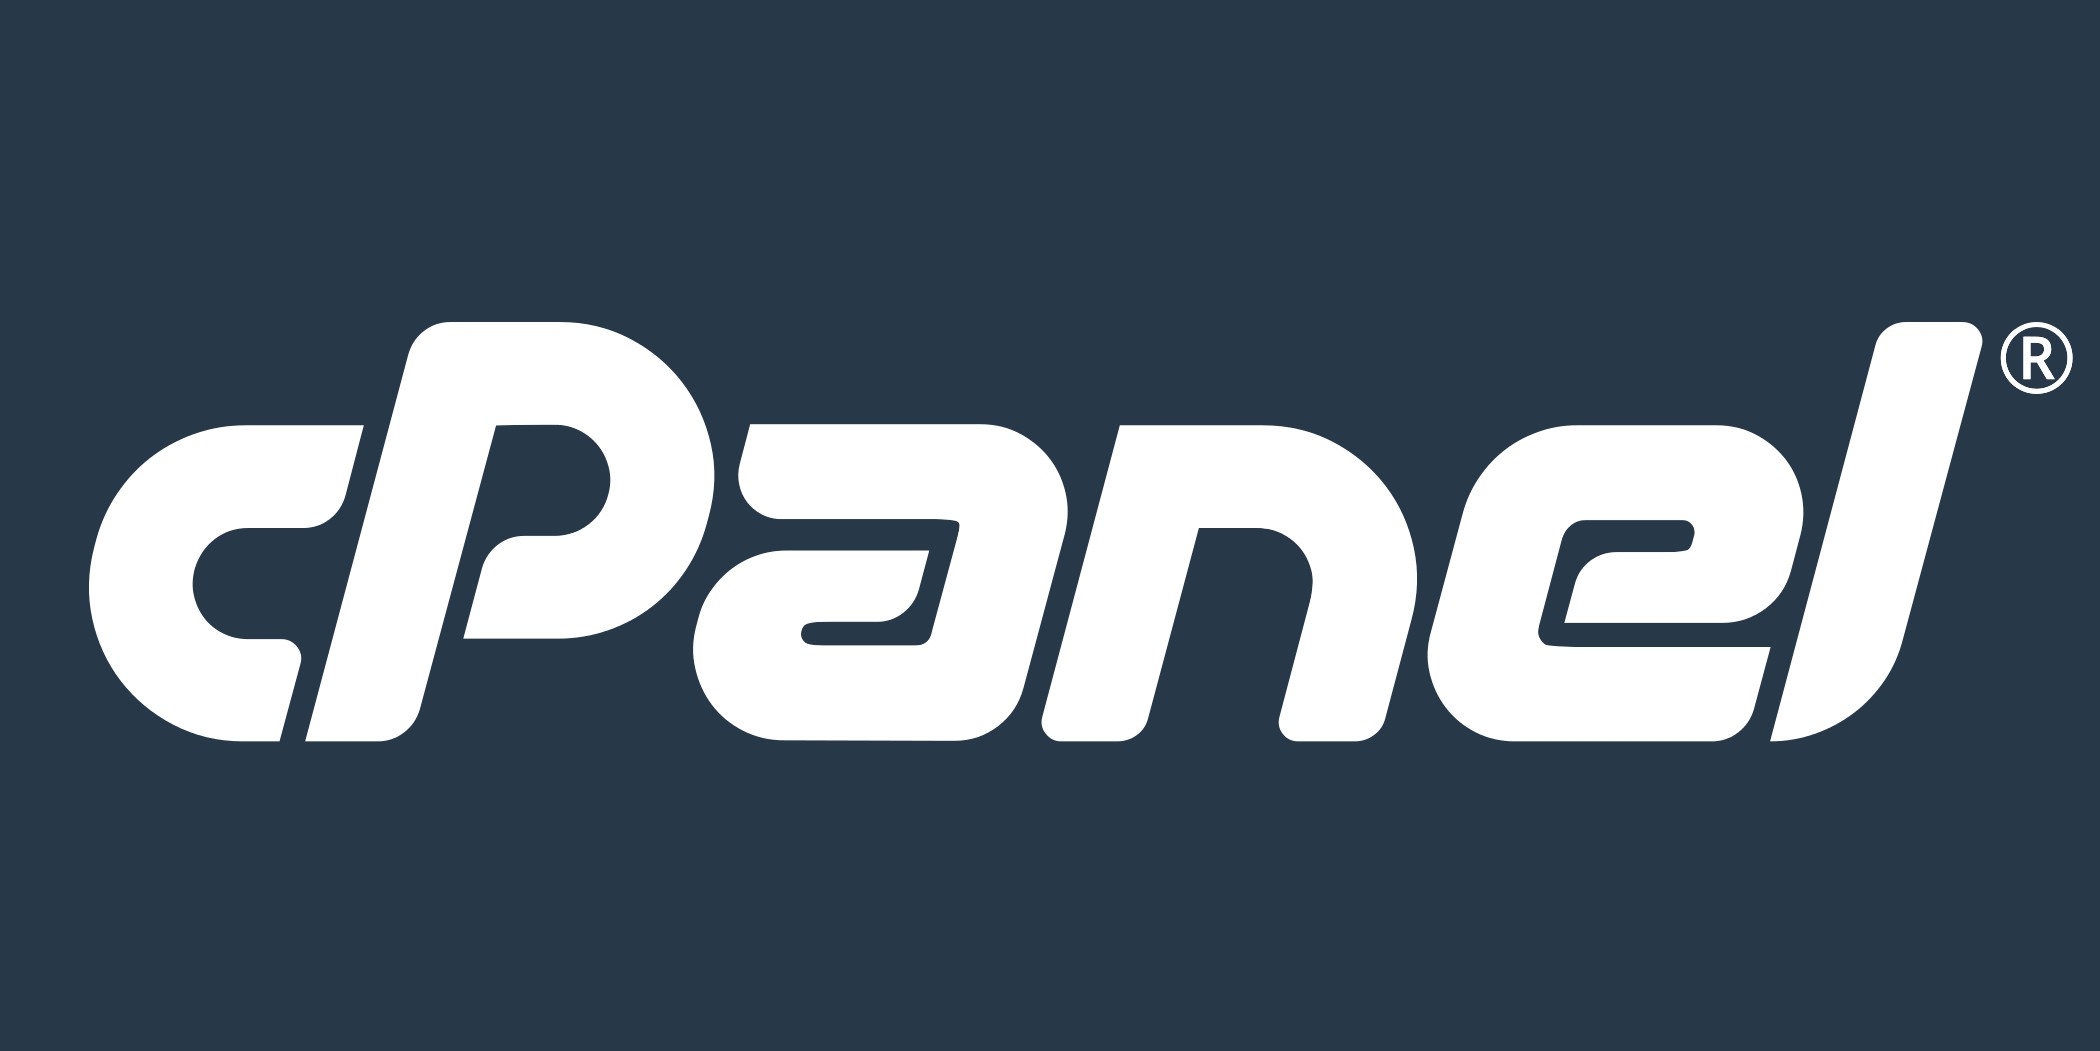 What Are the Benefits of a Cpanel License for Yourself as Well as Your Clients?